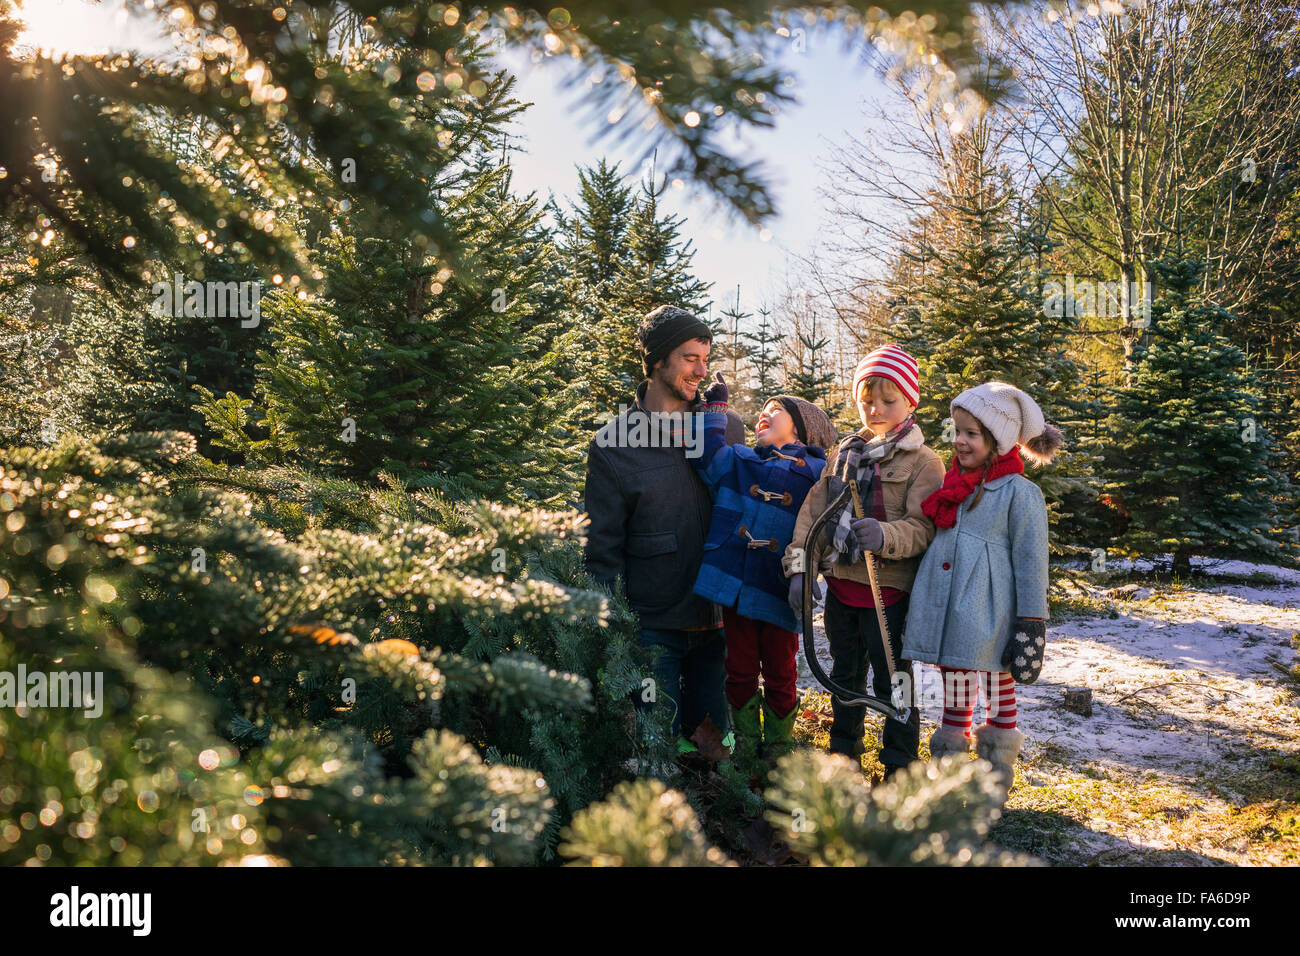 Father with three children standing in a Christmas tree farm with a hand saw Stock Photo